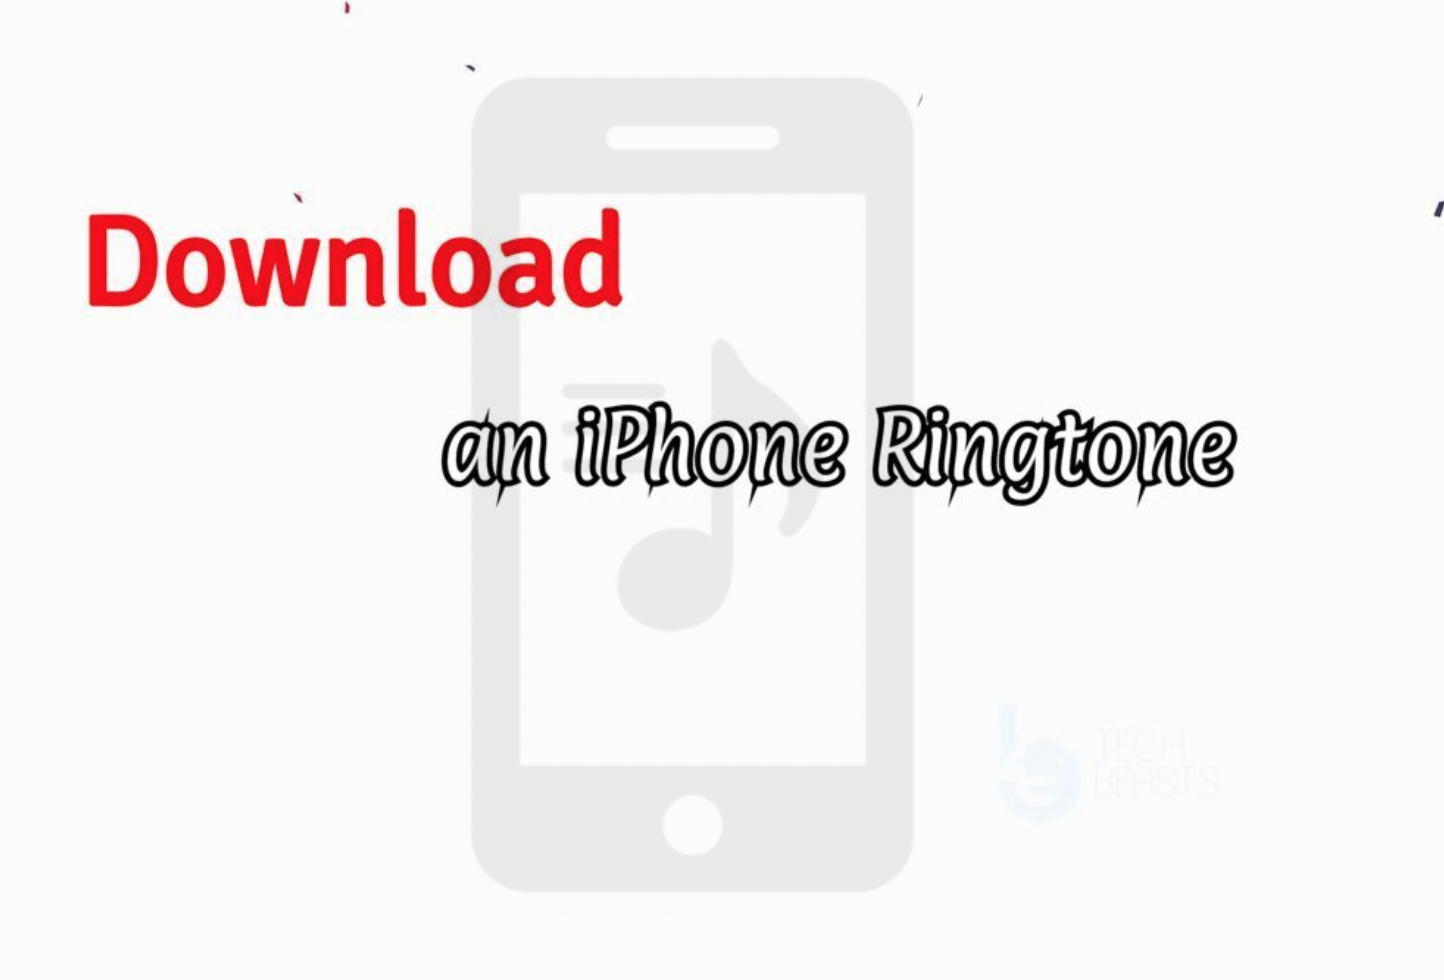 Download an iPhone Ringtone [ How To ] TechBeasts